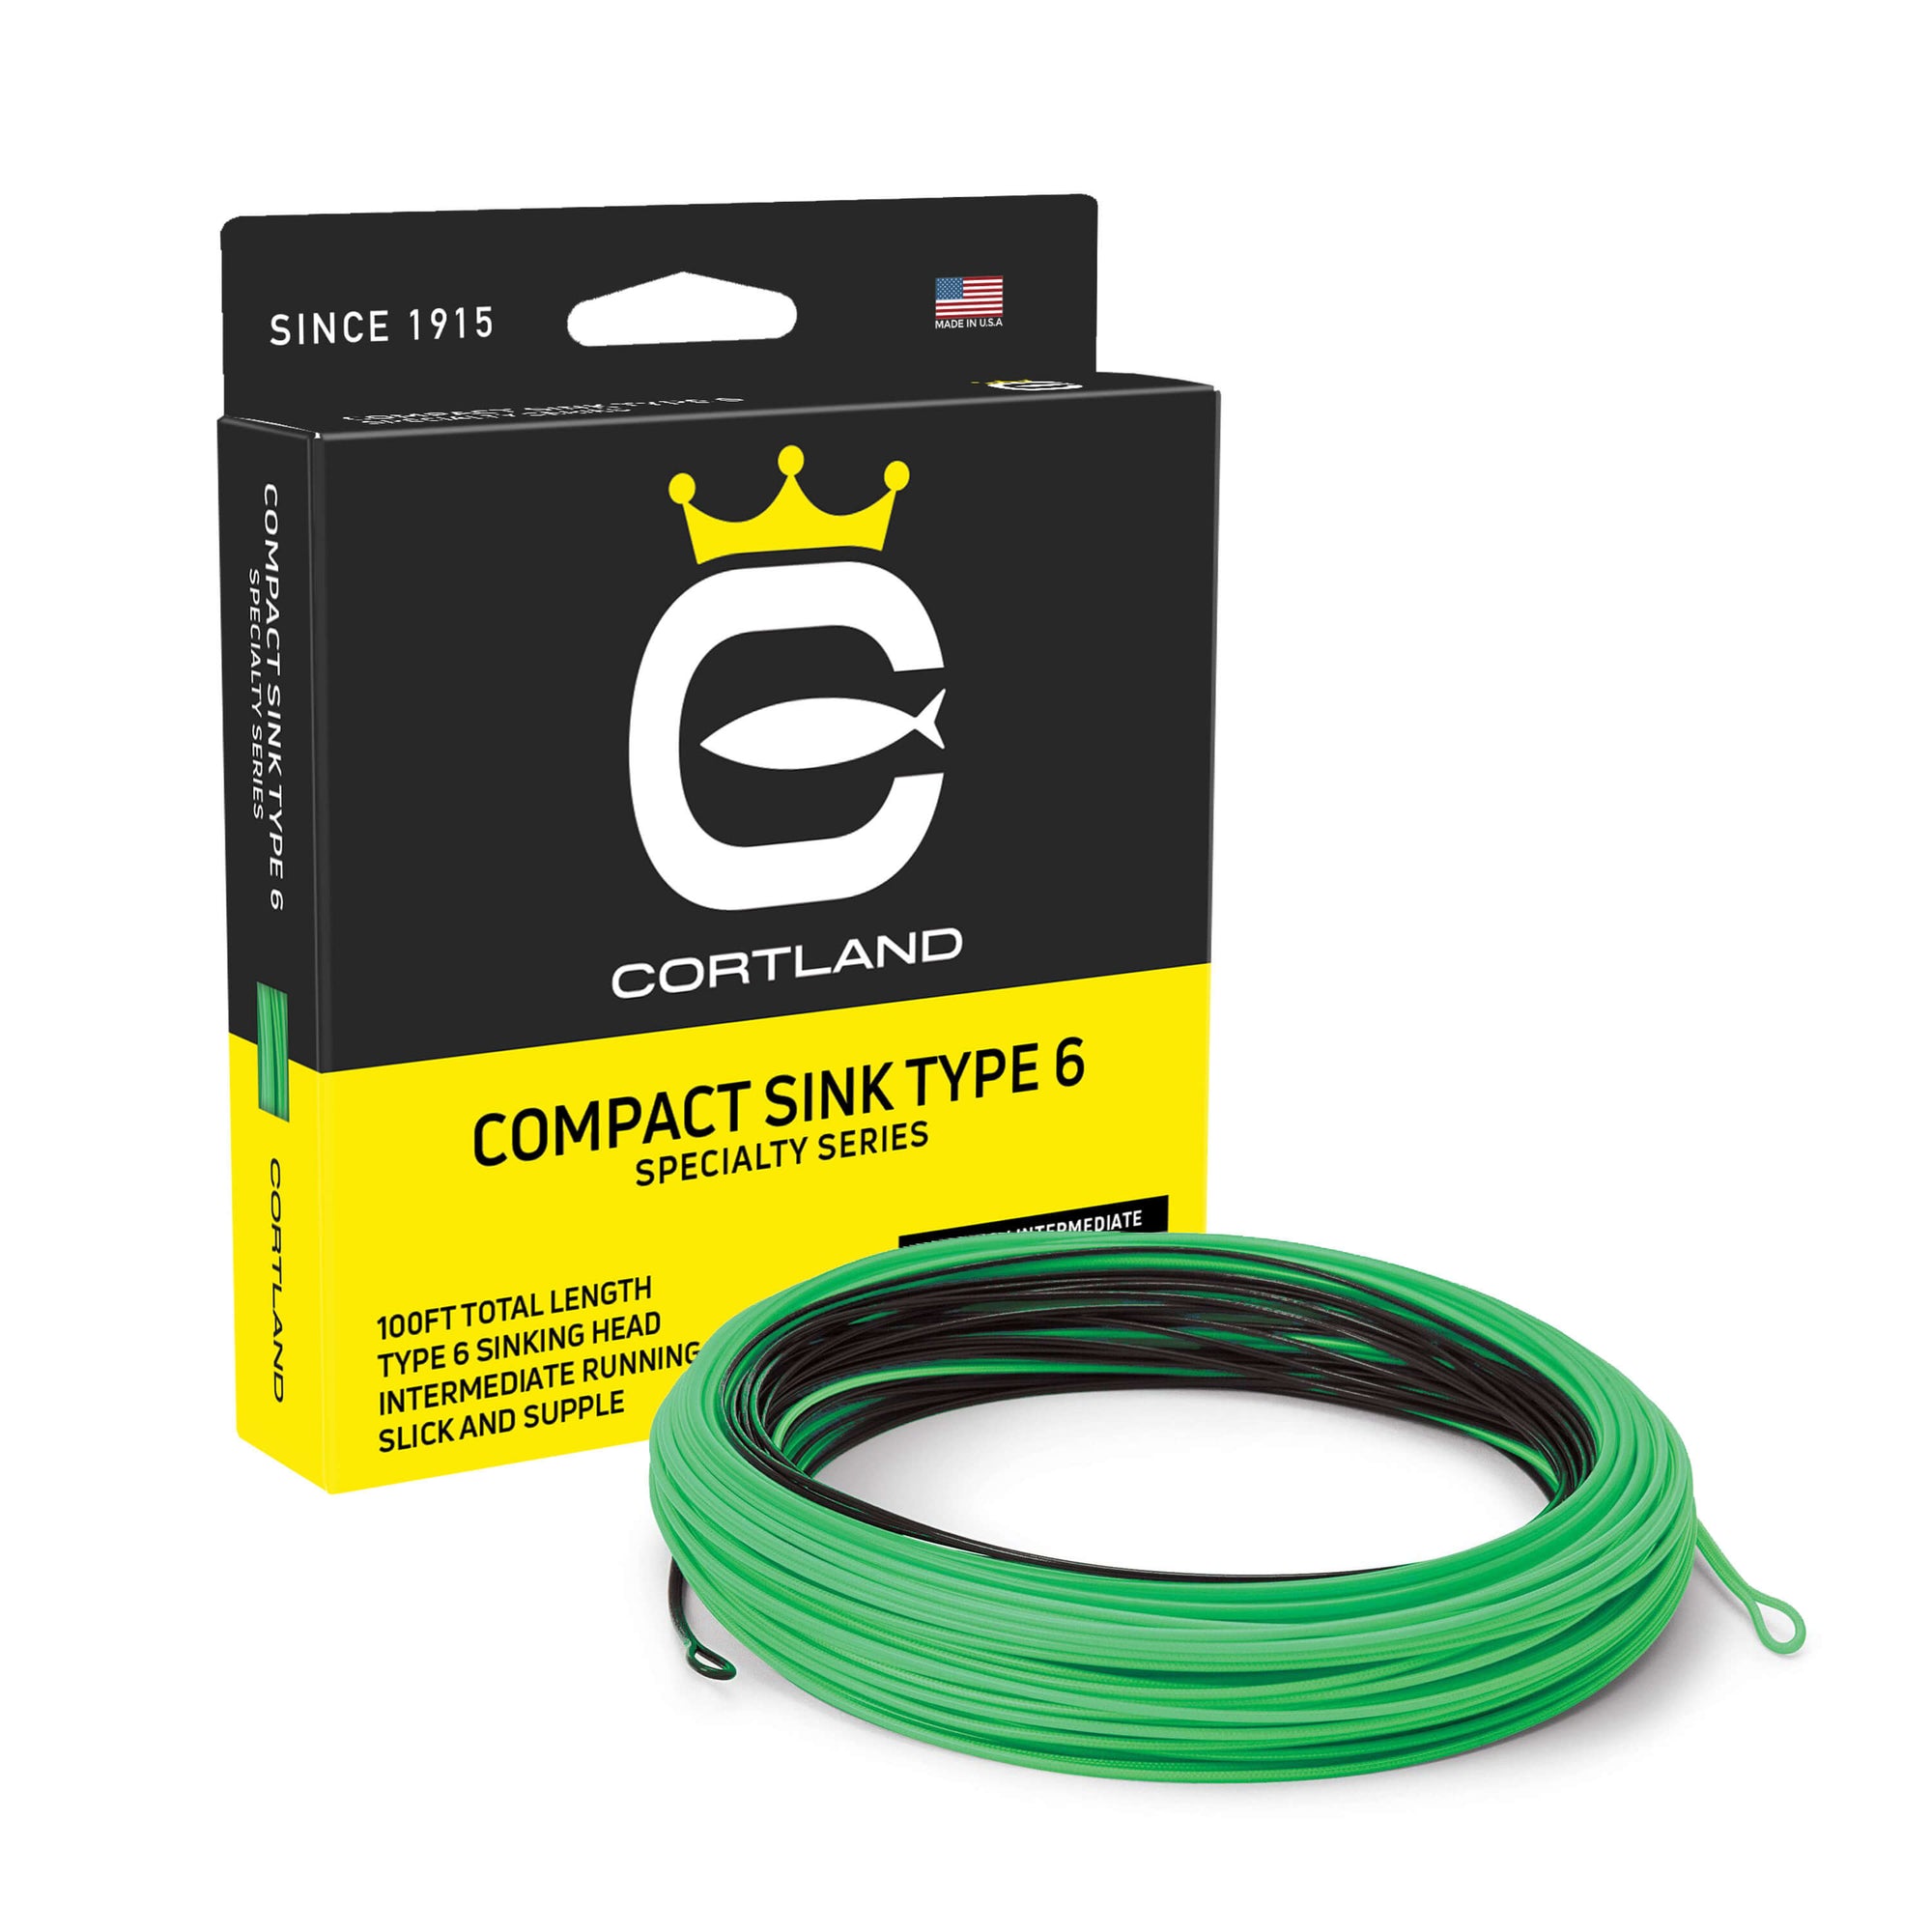 Compact Sink Type 6 Fly Fishing Line and Box. The coil is black and electric green. The box is black and yellow. 